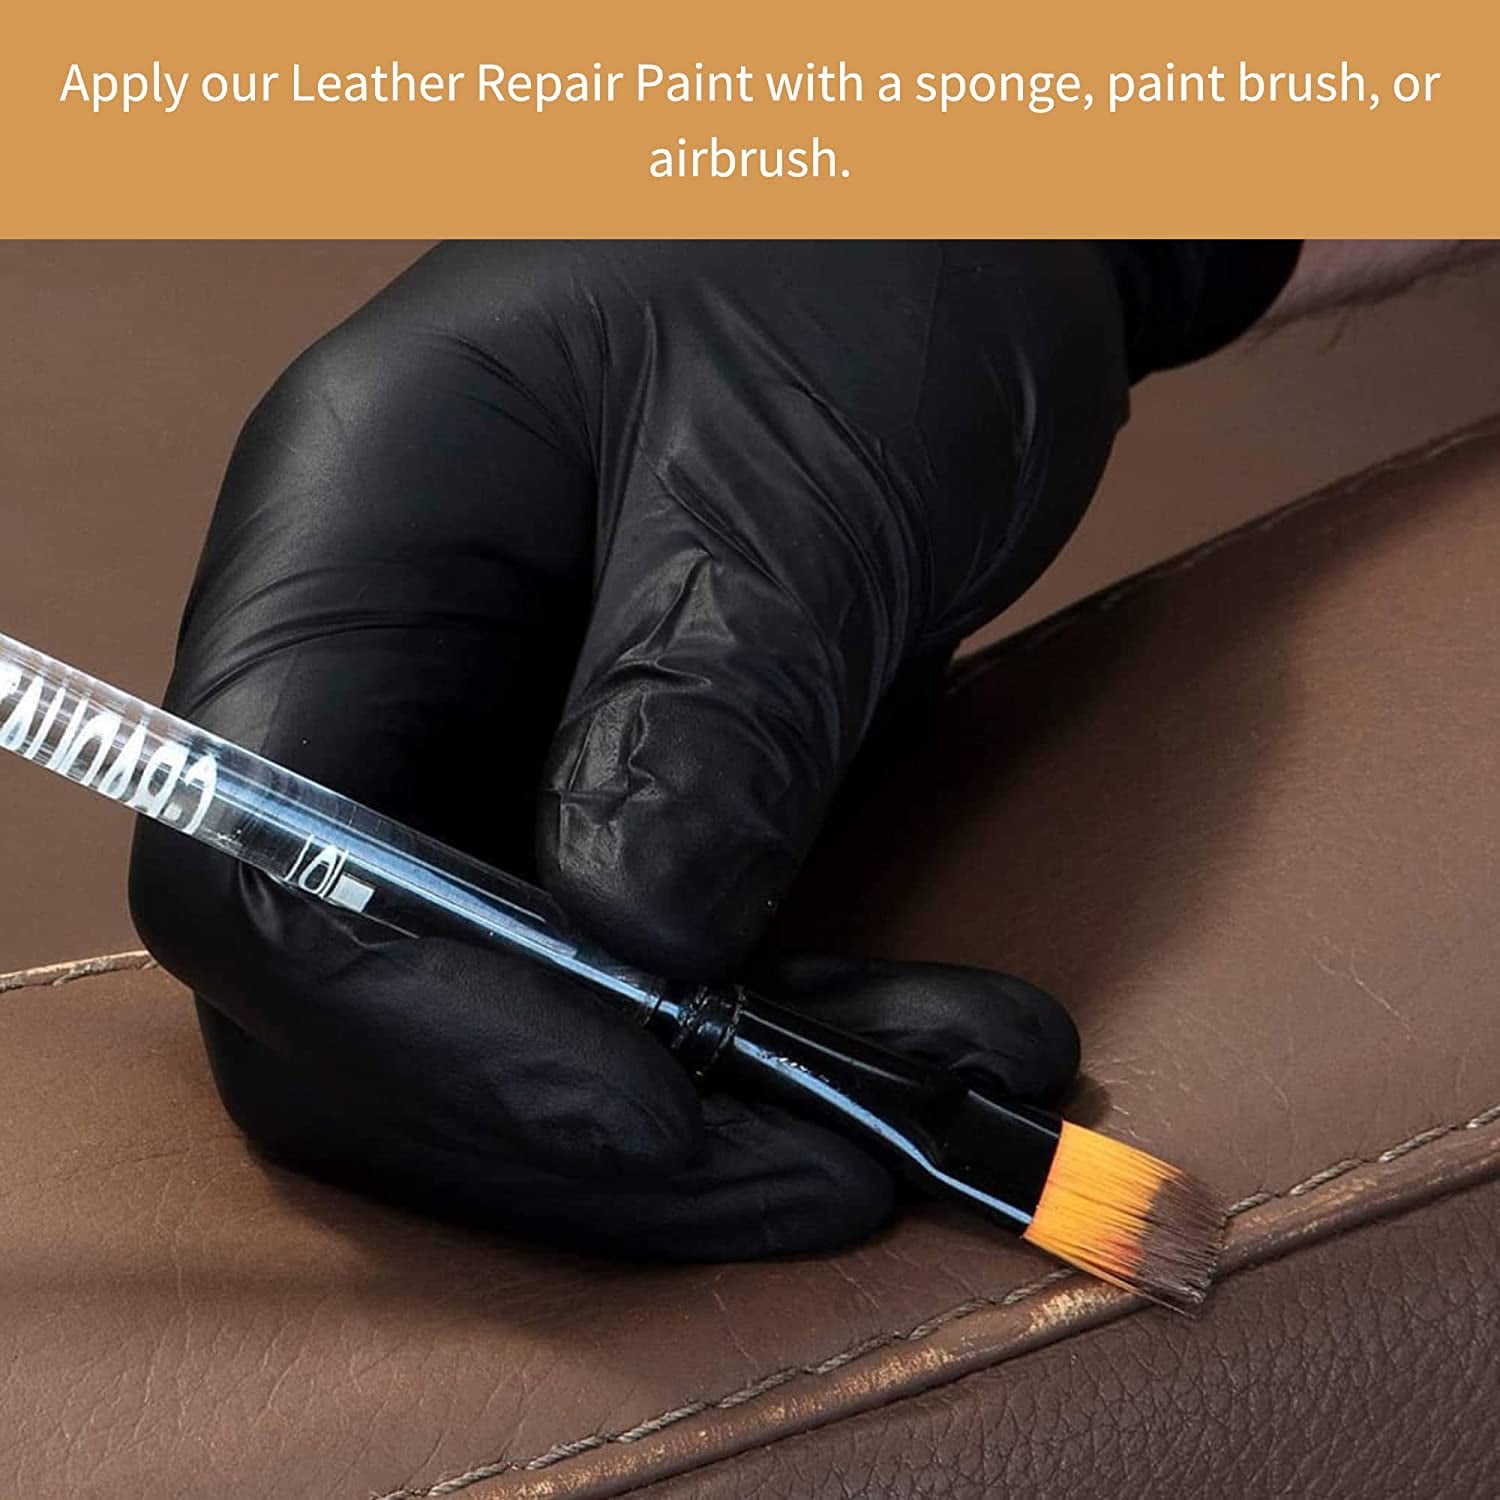 Furniture Clinic Furniture clinic Leather Repair Paint 2-in-1 Seal and  color Use on Scratches, Tears, and Holes in car Seats, Furniture Quick